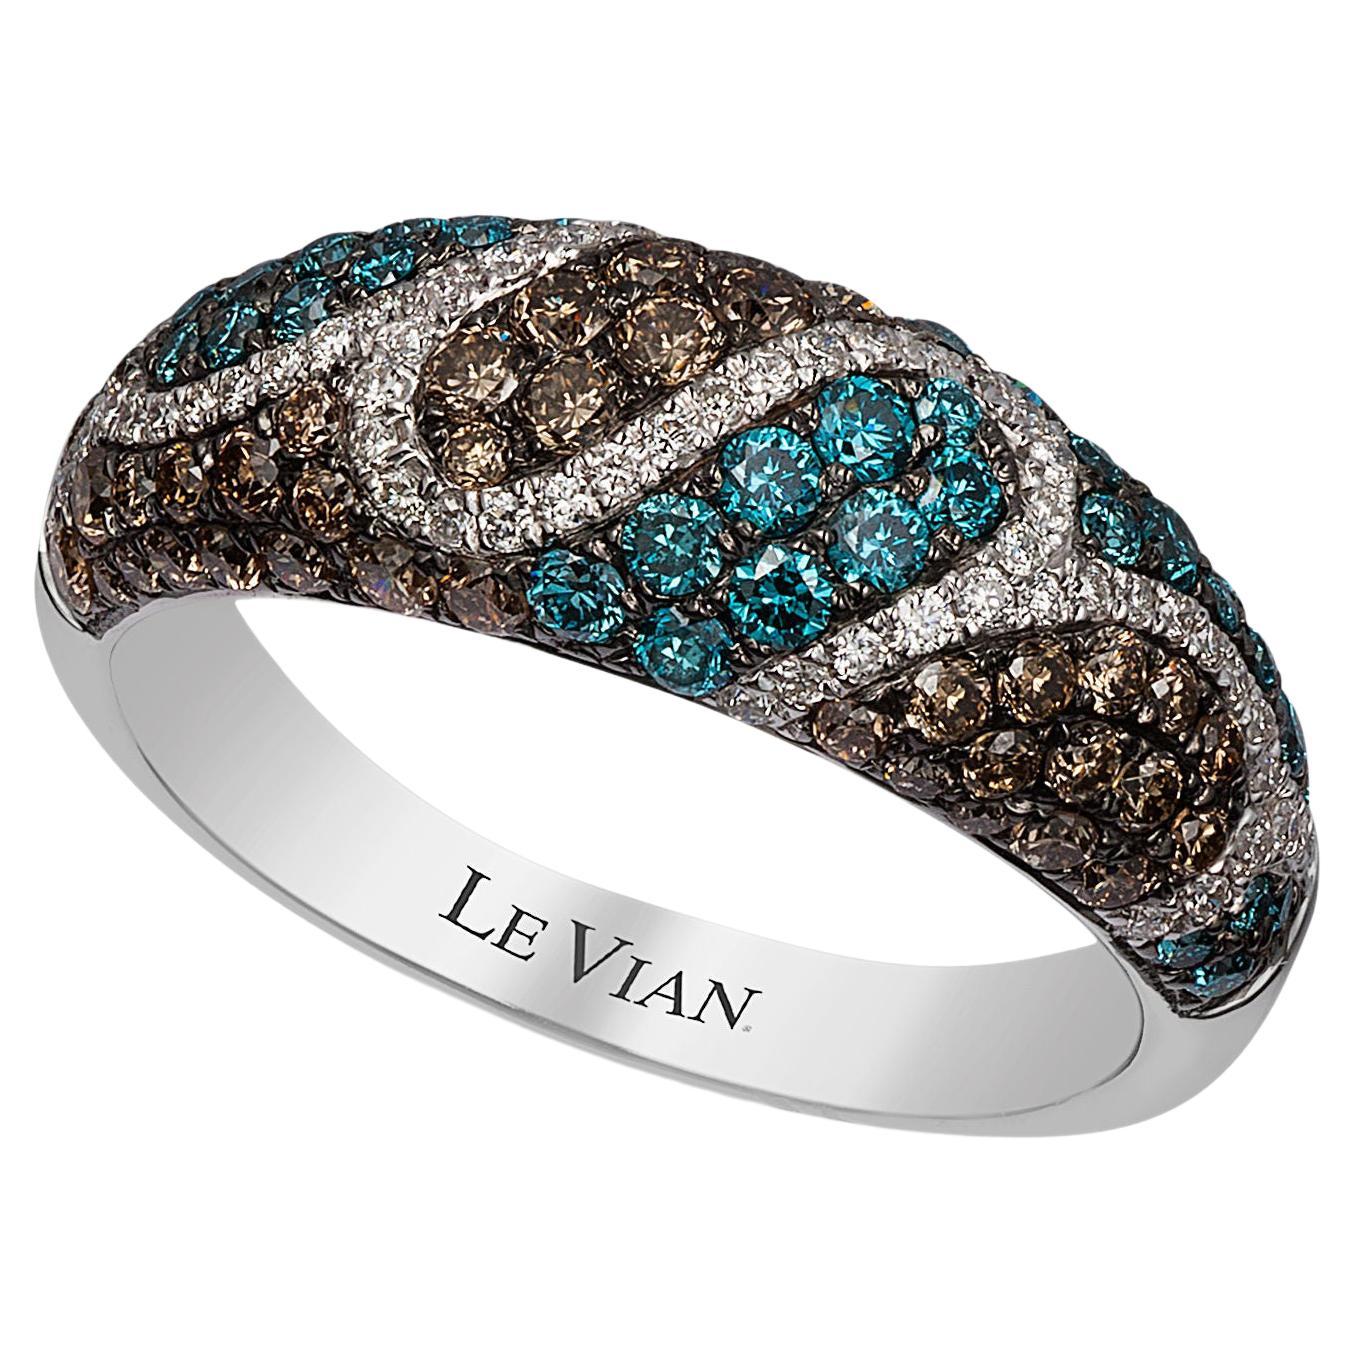 Le Vian Ring Blue, Chocolate, and White Diamonds Set in 14K White Gold